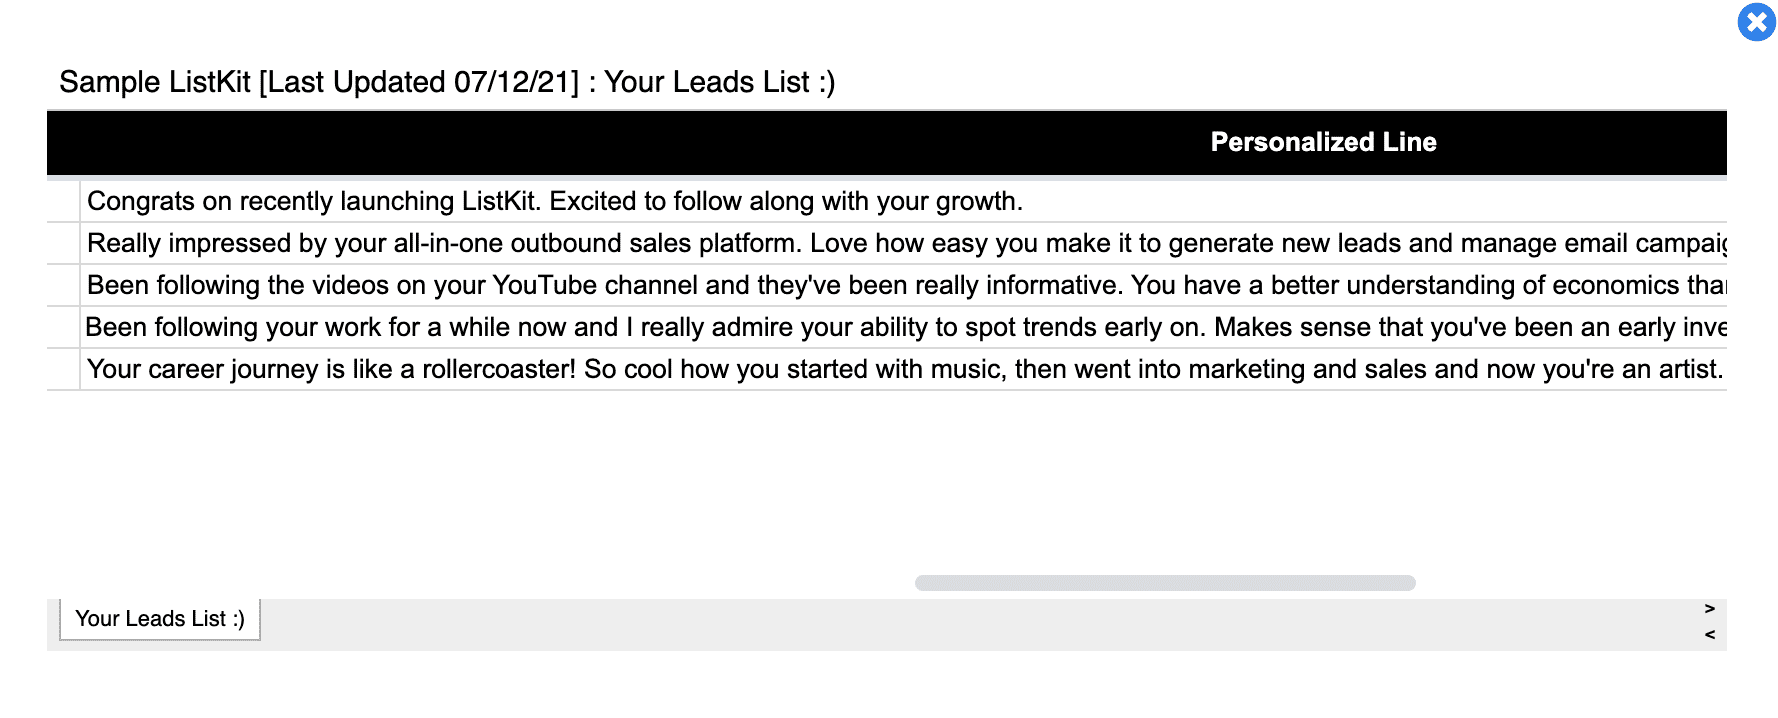 Personalized lead lists from ListKit